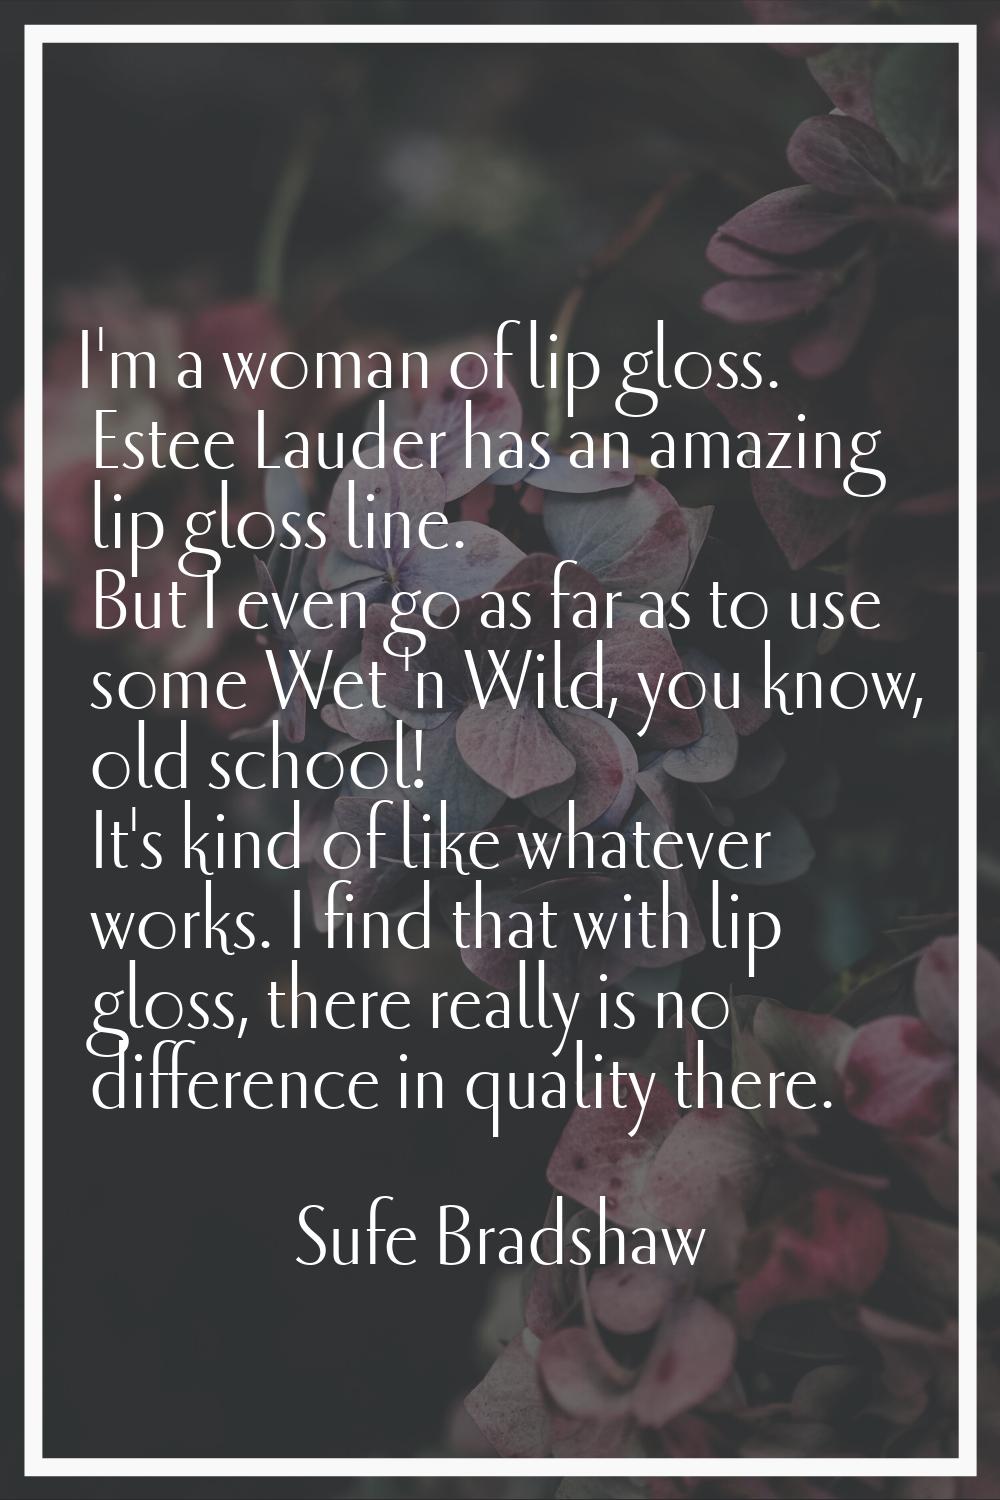 I'm a woman of lip gloss. Estee Lauder has an amazing lip gloss line. But I even go as far as to us